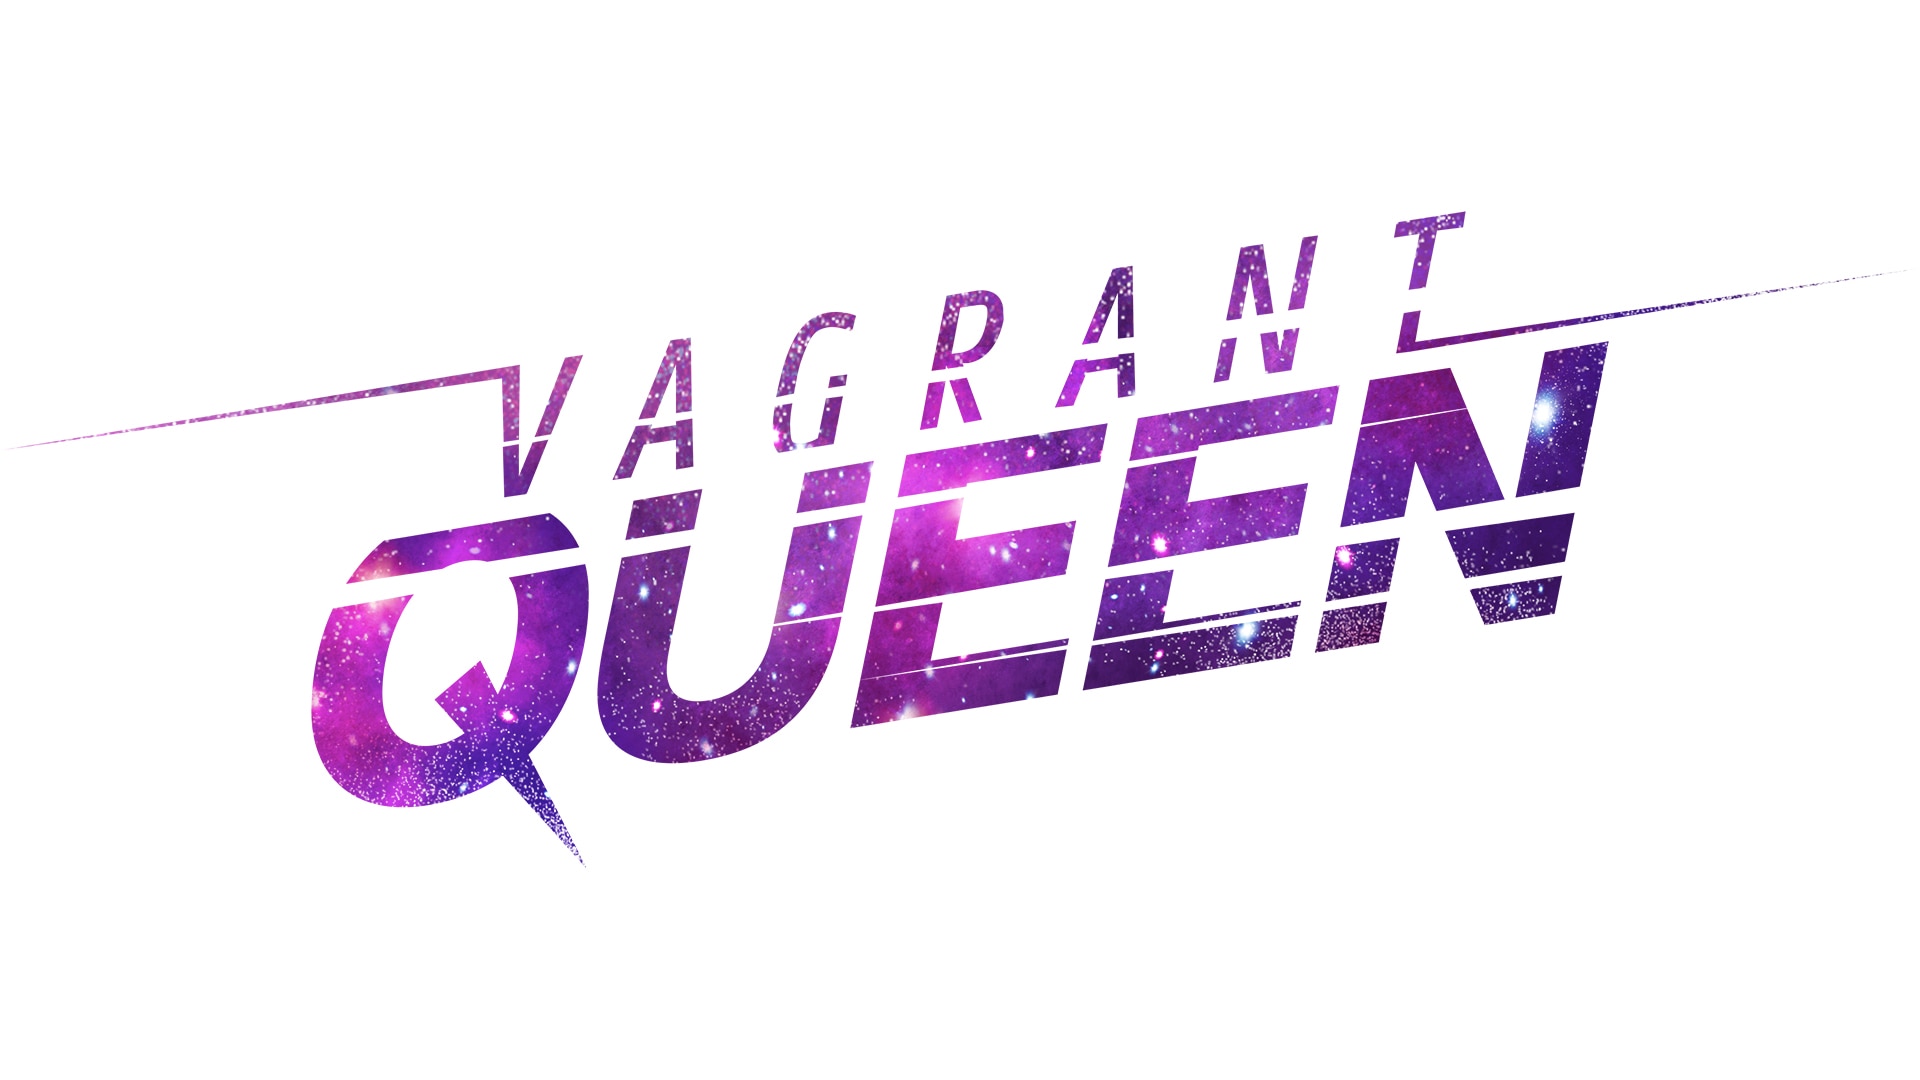 Vagrant Queen S01 E08 Clip  'The Team Fights Zombies in Slow-mo